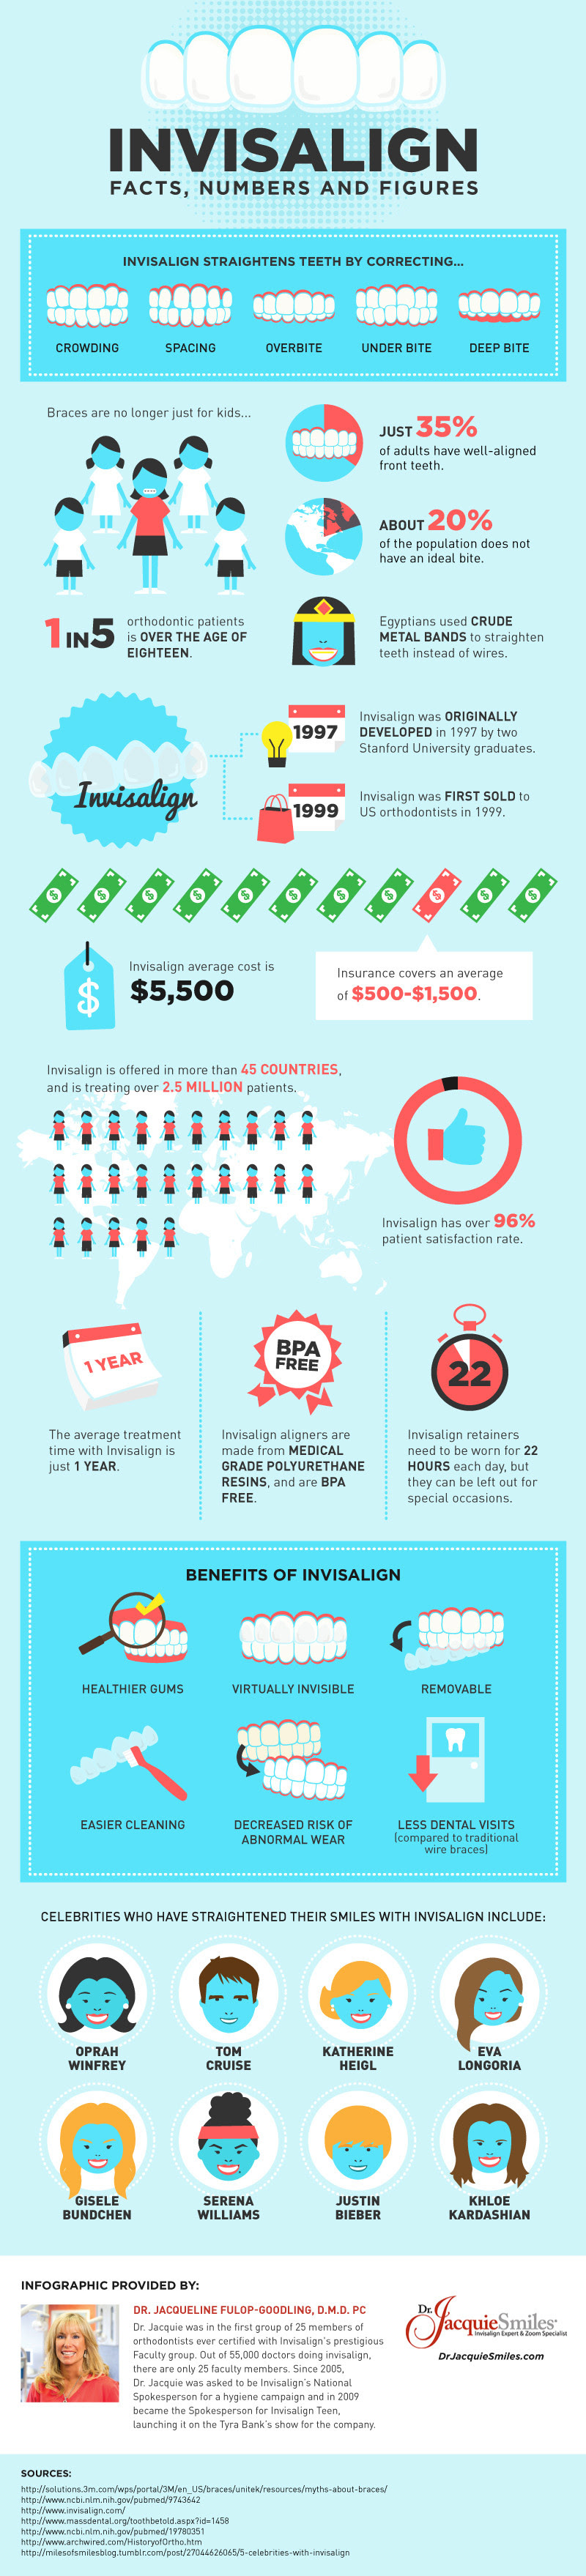 Infographic: Invisalign: Facts, Numbers and Figures